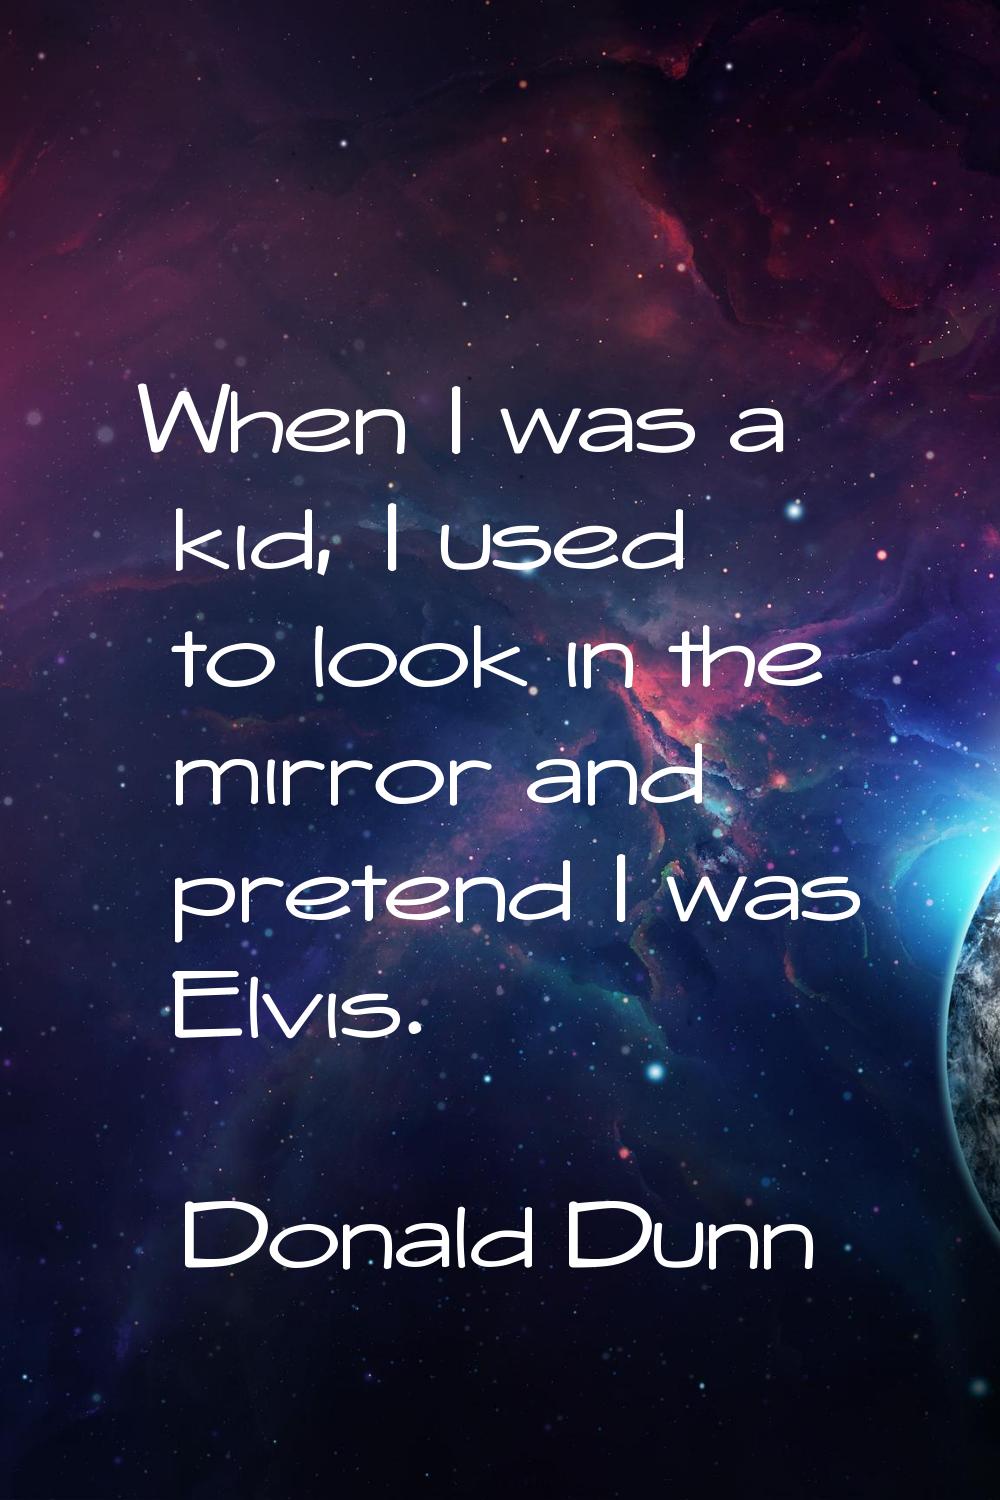 When I was a kid, I used to look in the mirror and pretend I was Elvis.